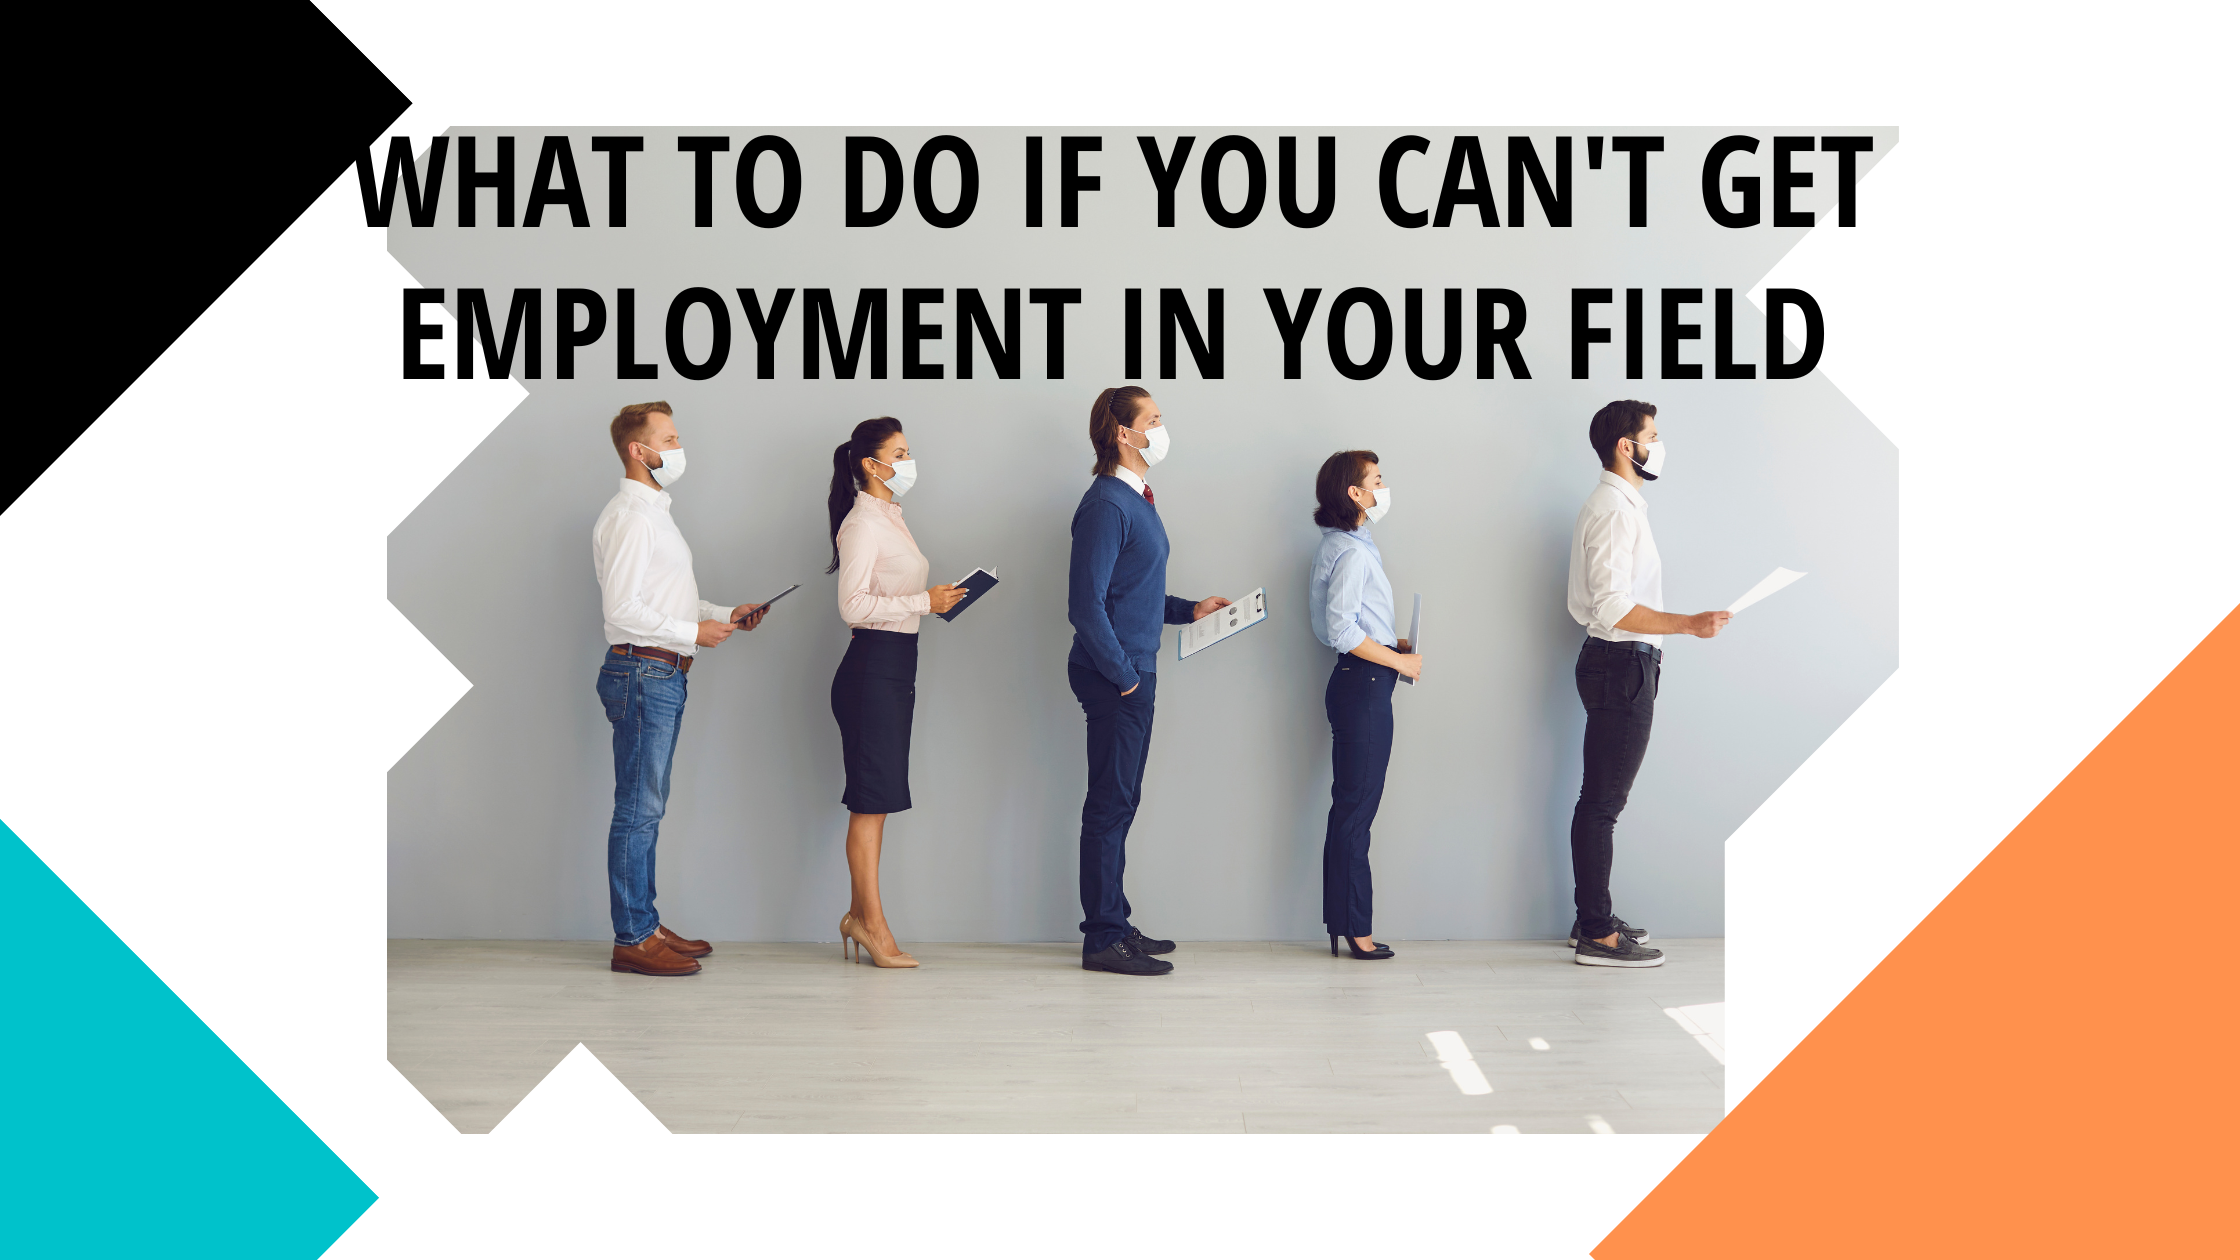 What To Do If You Can't Get Employment In Your Field